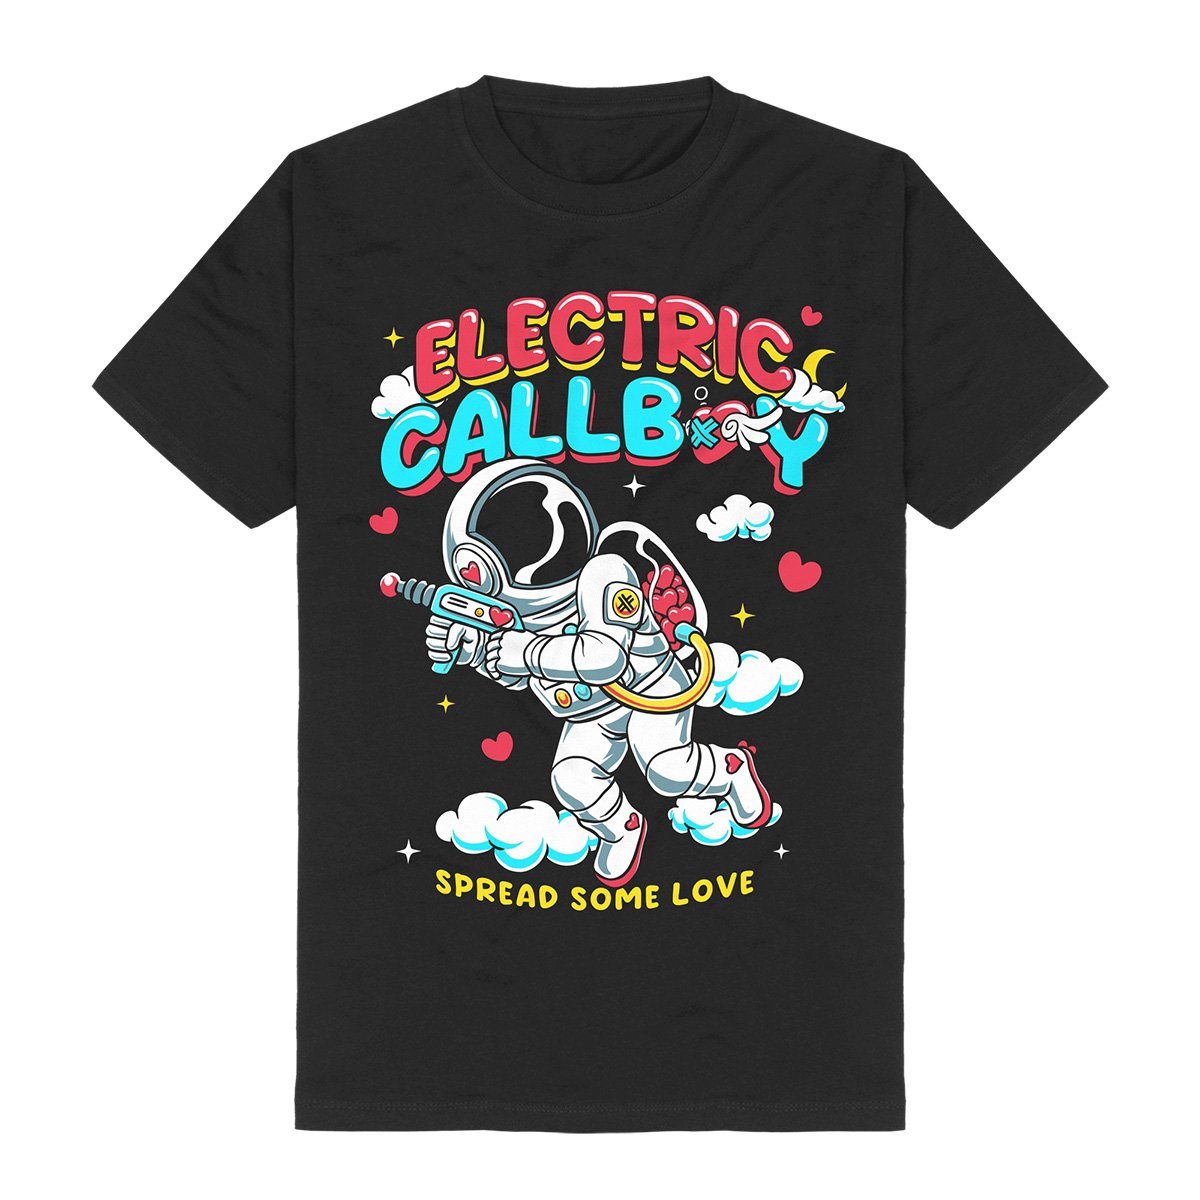 Electric Callboy T-Shirt Spread Some Love